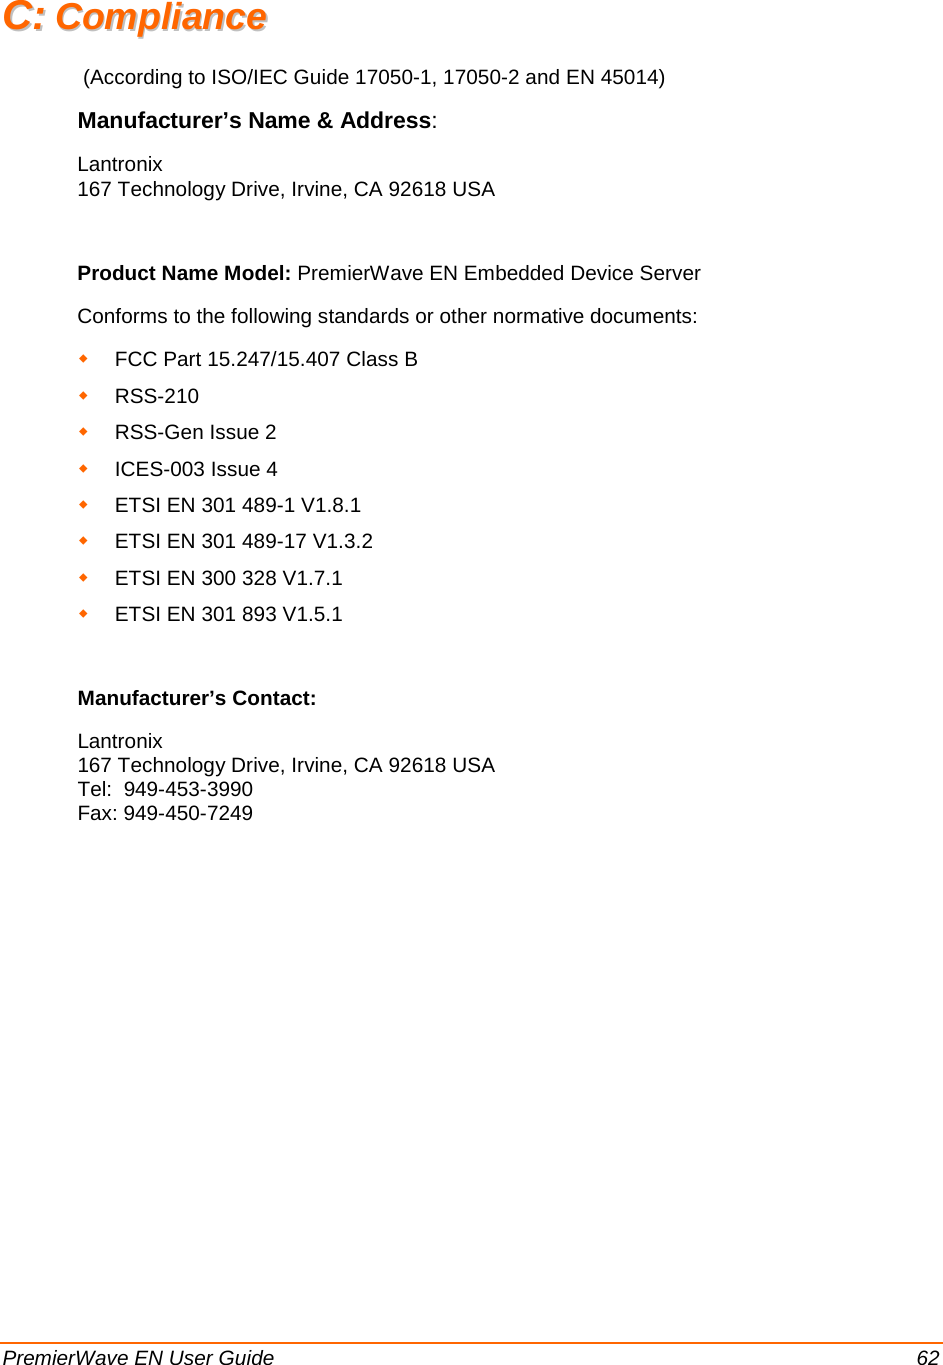  PremierWave EN User Guide    62 CC::  CCoommpplliiaannccee   (According to ISO/IEC Guide 17050-1, 17050-2 and EN 45014)  Manufacturer’s Name &amp; Address:  Lantronix 167 Technology Drive, Irvine, CA 92618 USA   Product Name Model: PremierWave EN Embedded Device Server Conforms to the following standards or other normative documents:  FCC Part 15.247/15.407 Class B  RSS-210   RSS-Gen Issue 2    ICES-003 Issue 4   ETSI EN 301 489-1 V1.8.1  ETSI EN 301 489-17 V1.3.2  ETSI EN 300 328 V1.7.1  ETSI EN 301 893 V1.5.1  Manufacturer’s Contact: Lantronix 167 Technology Drive, Irvine, CA 92618 USA Tel:  949-453-3990 Fax: 949-450-7249  